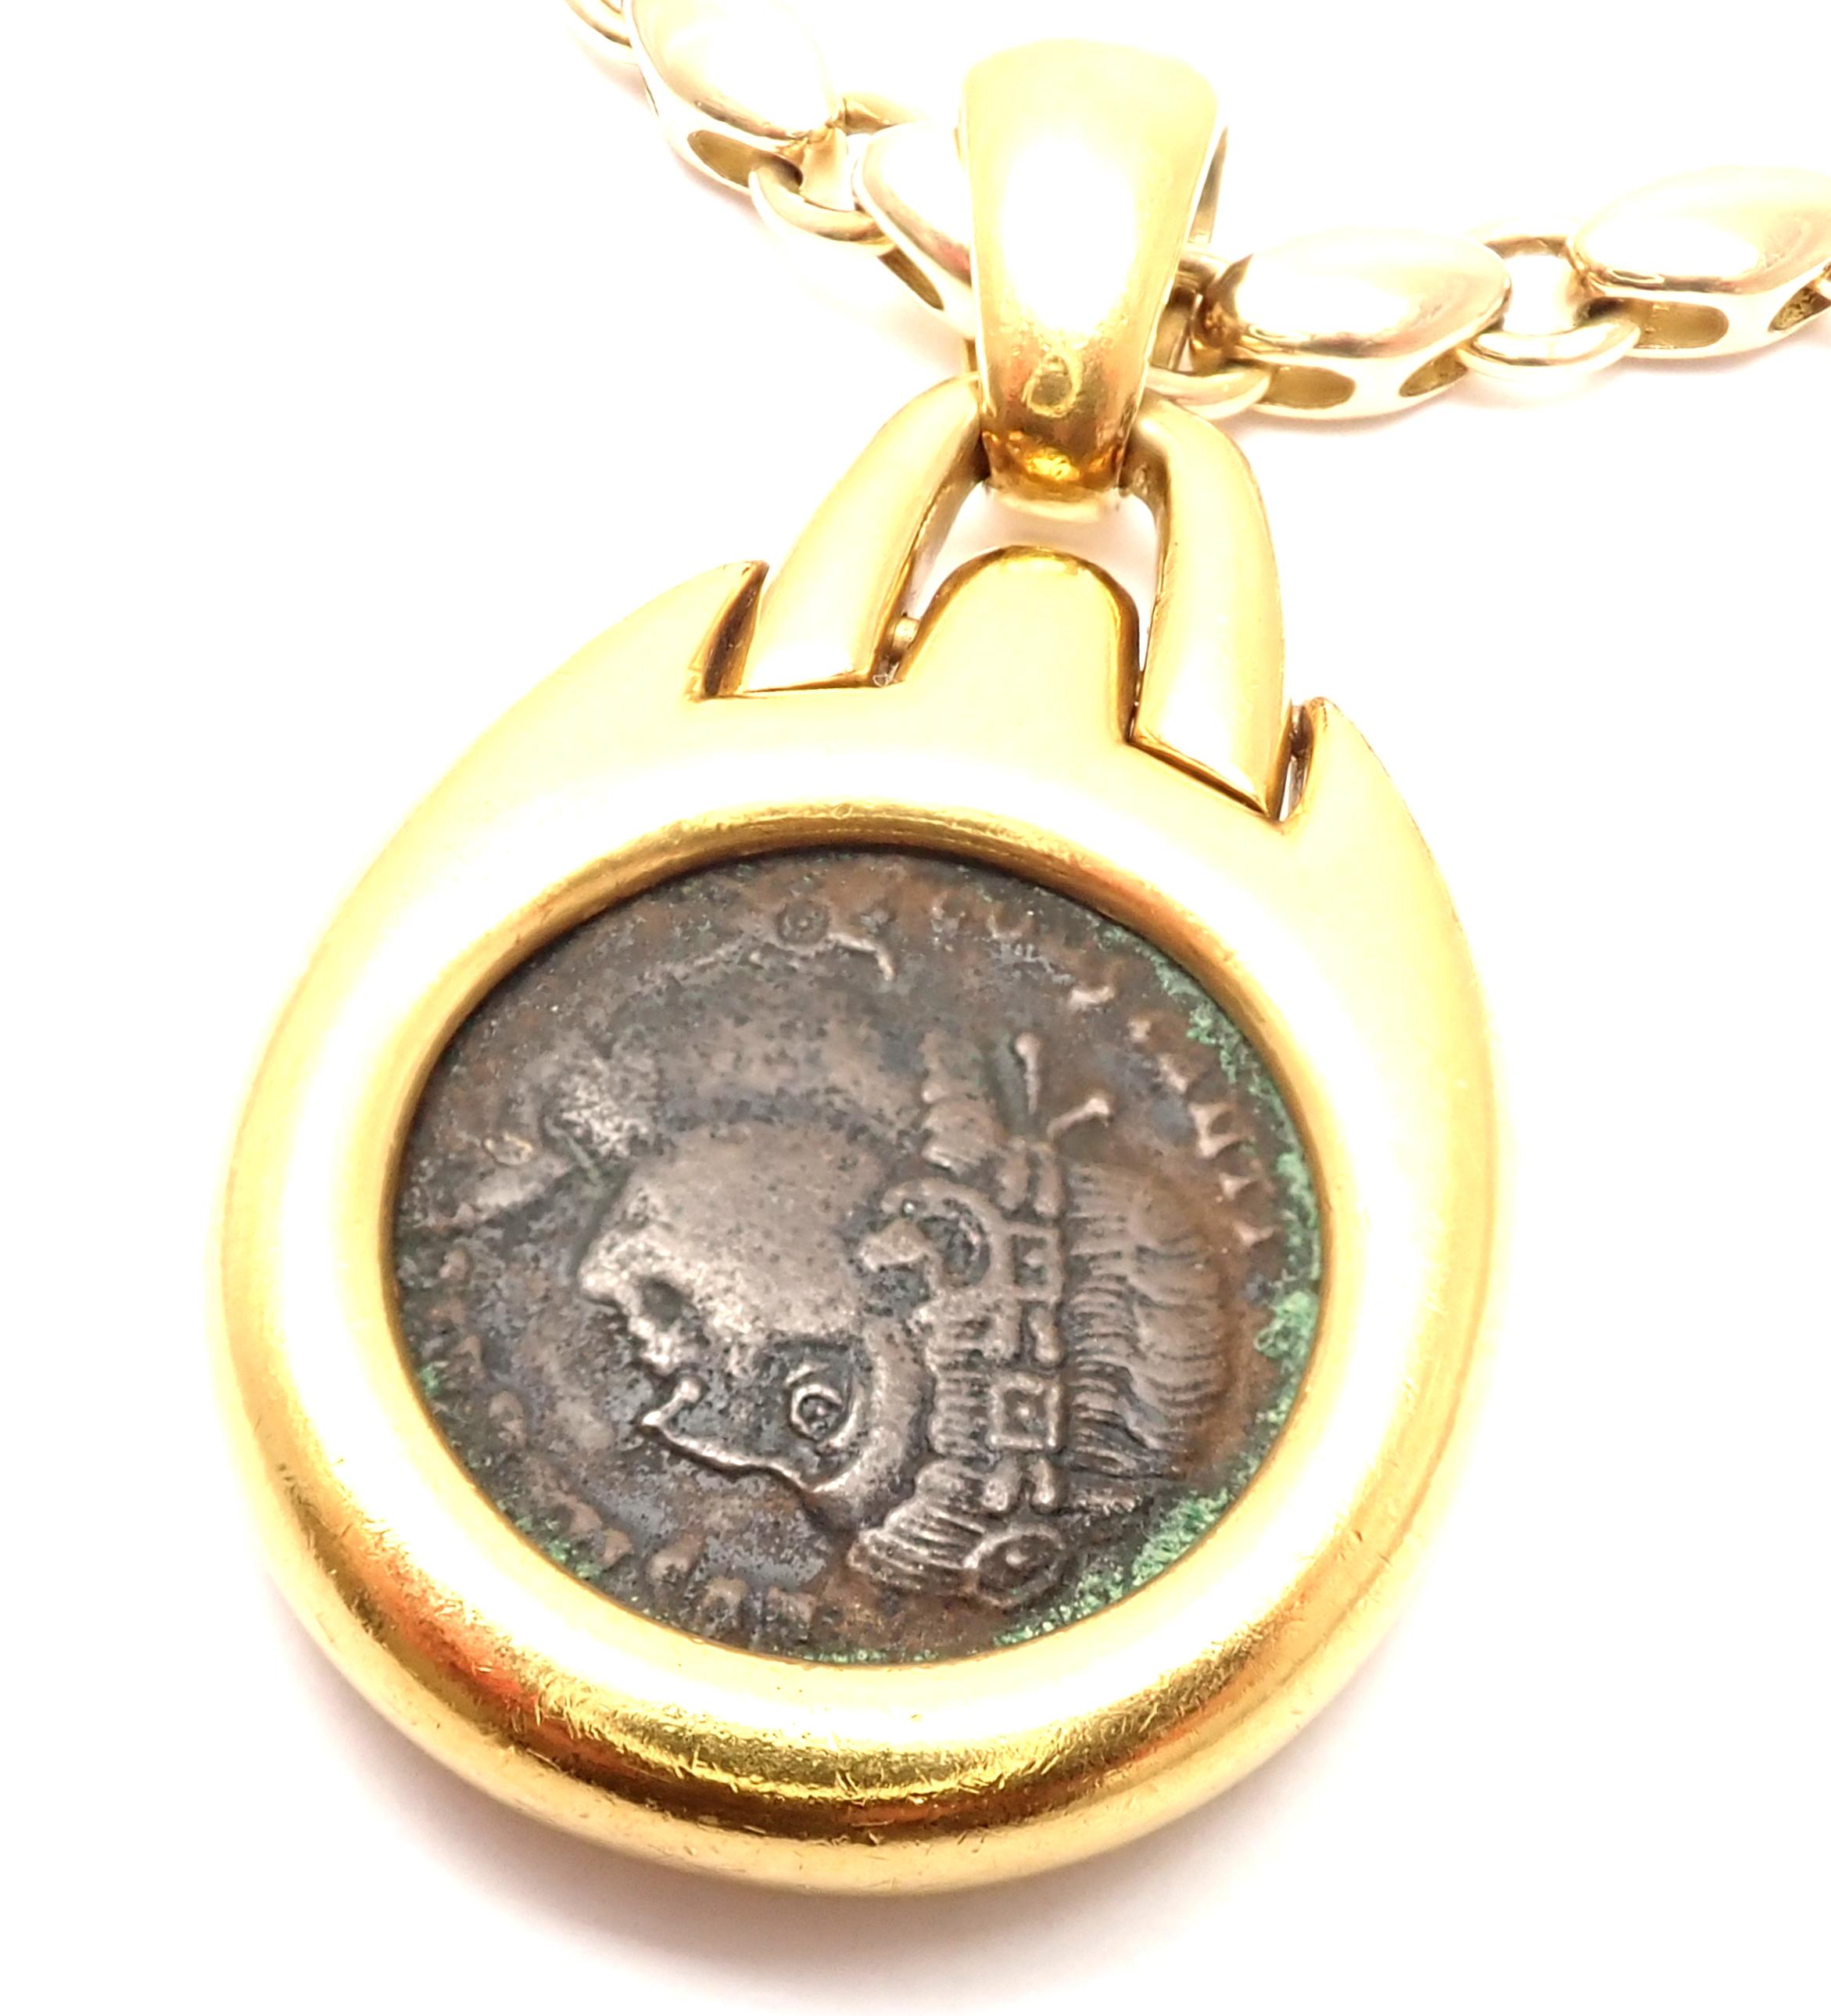 18k yellow gold ancient Roman coin, link chain necklace by Bulgari.
Measurements: 
Length: 24